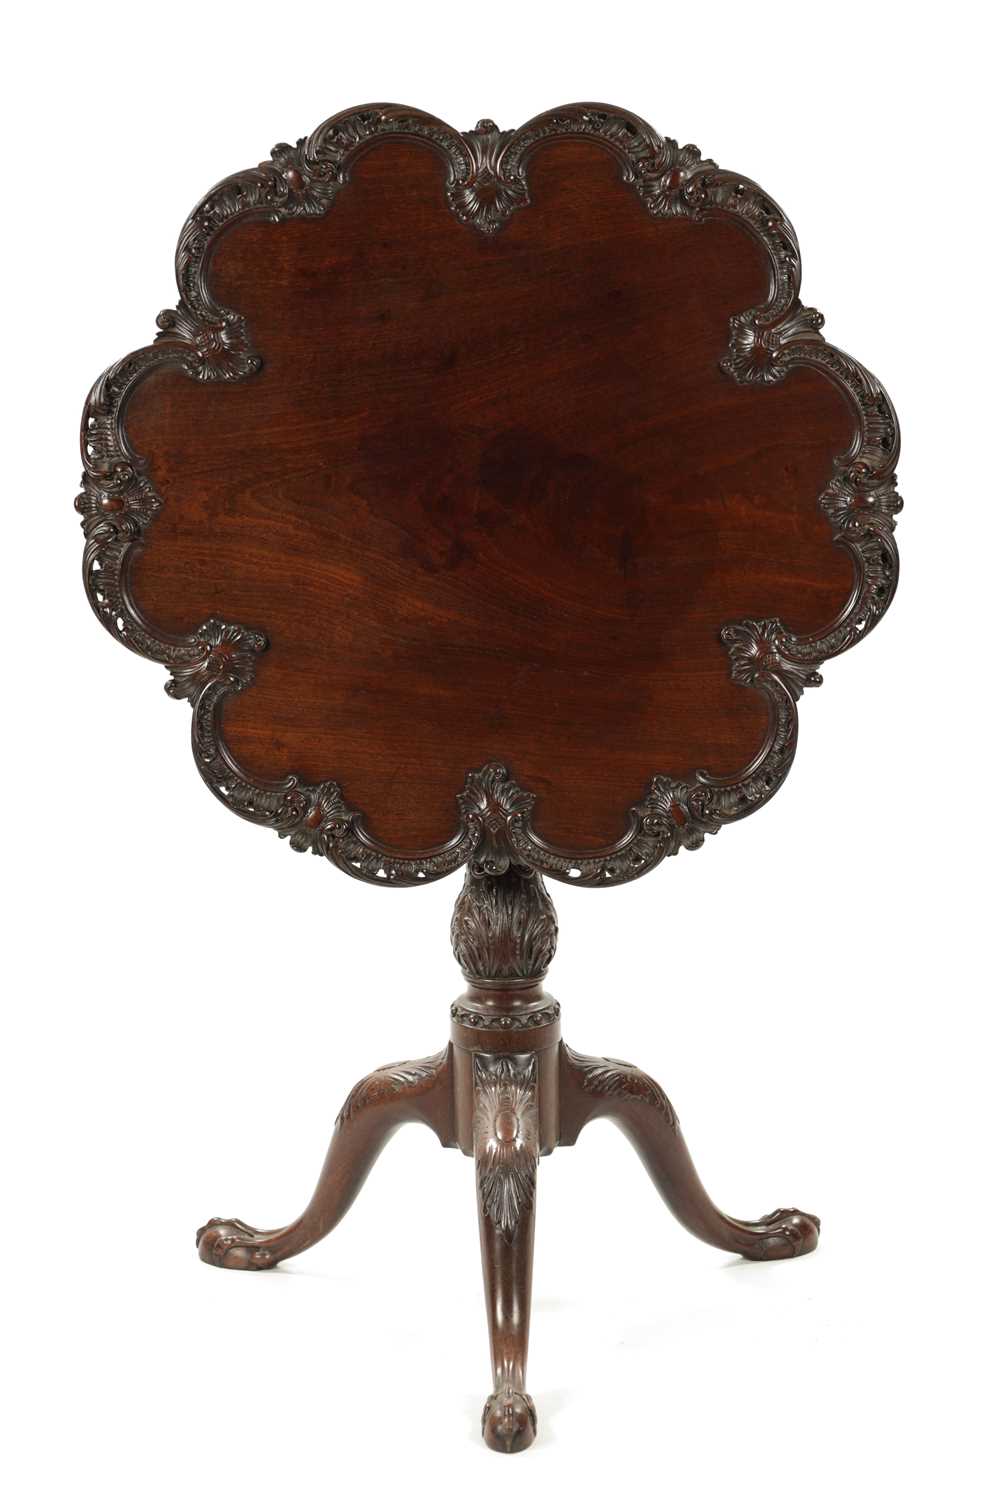 A FINE GEORGE III CHIPPENDALE CARVED MAHOGANY TILT-TOP SUPPER TABLE